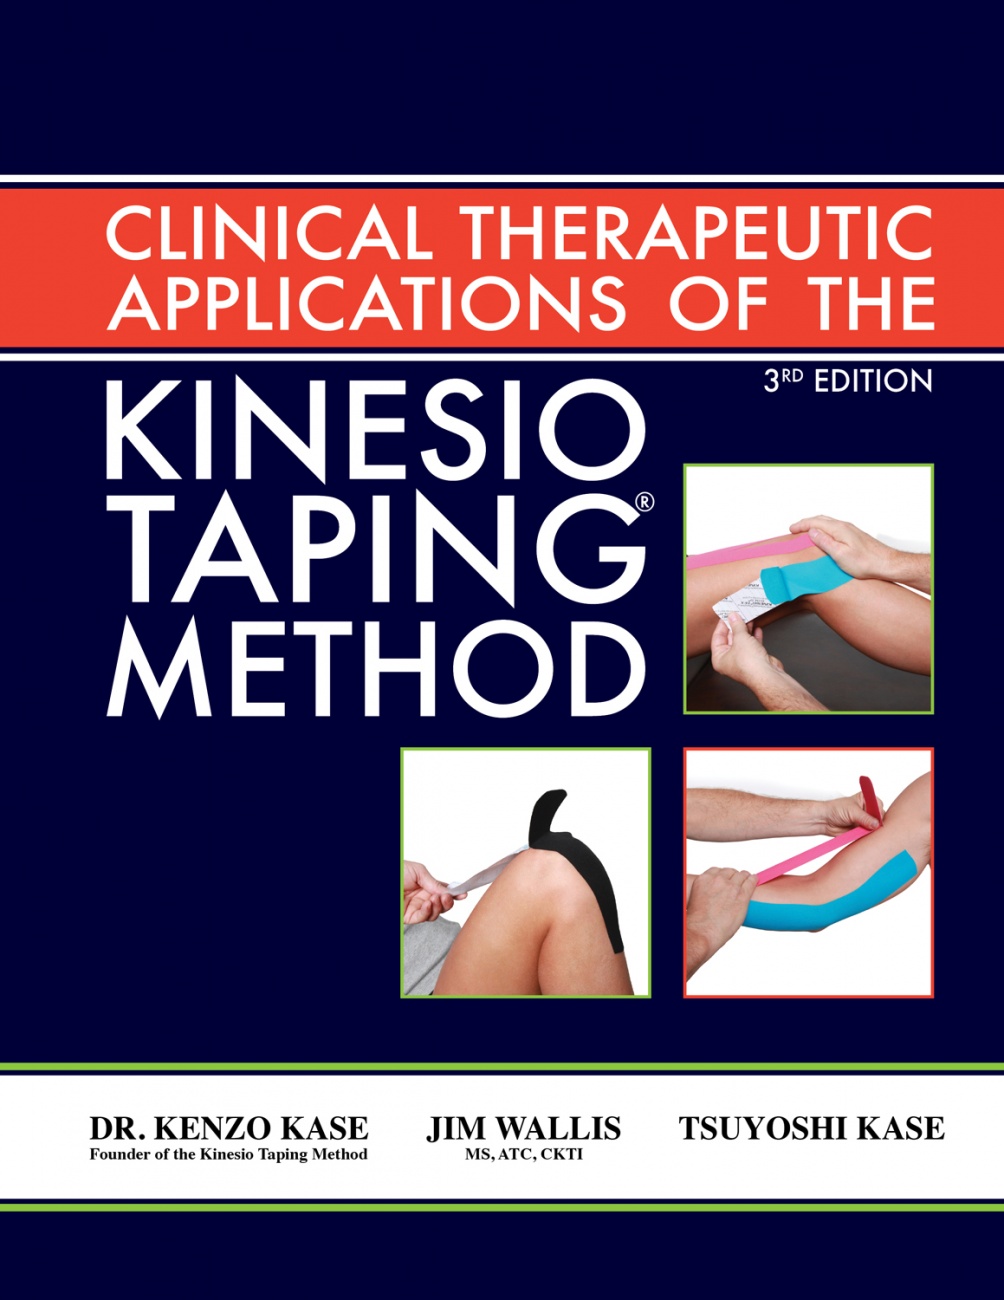 Clinical Therapeutic Applications of the Kinesio Taping Method Manual 3rd Edition